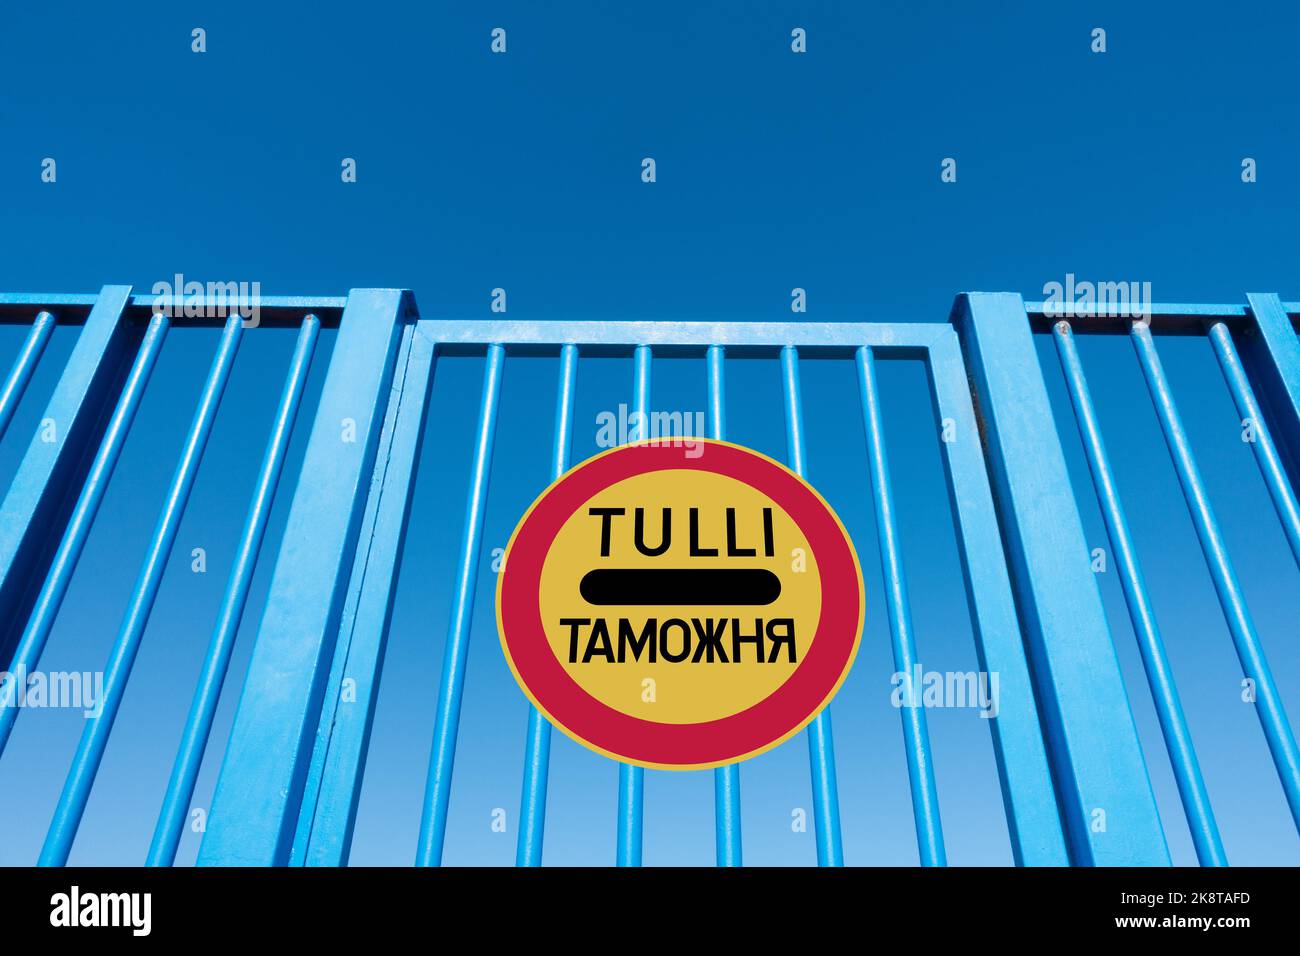 Finland Russia border fence concept image with customs sign in Finnish ( Tulli ) and Russian language. Stock Photo